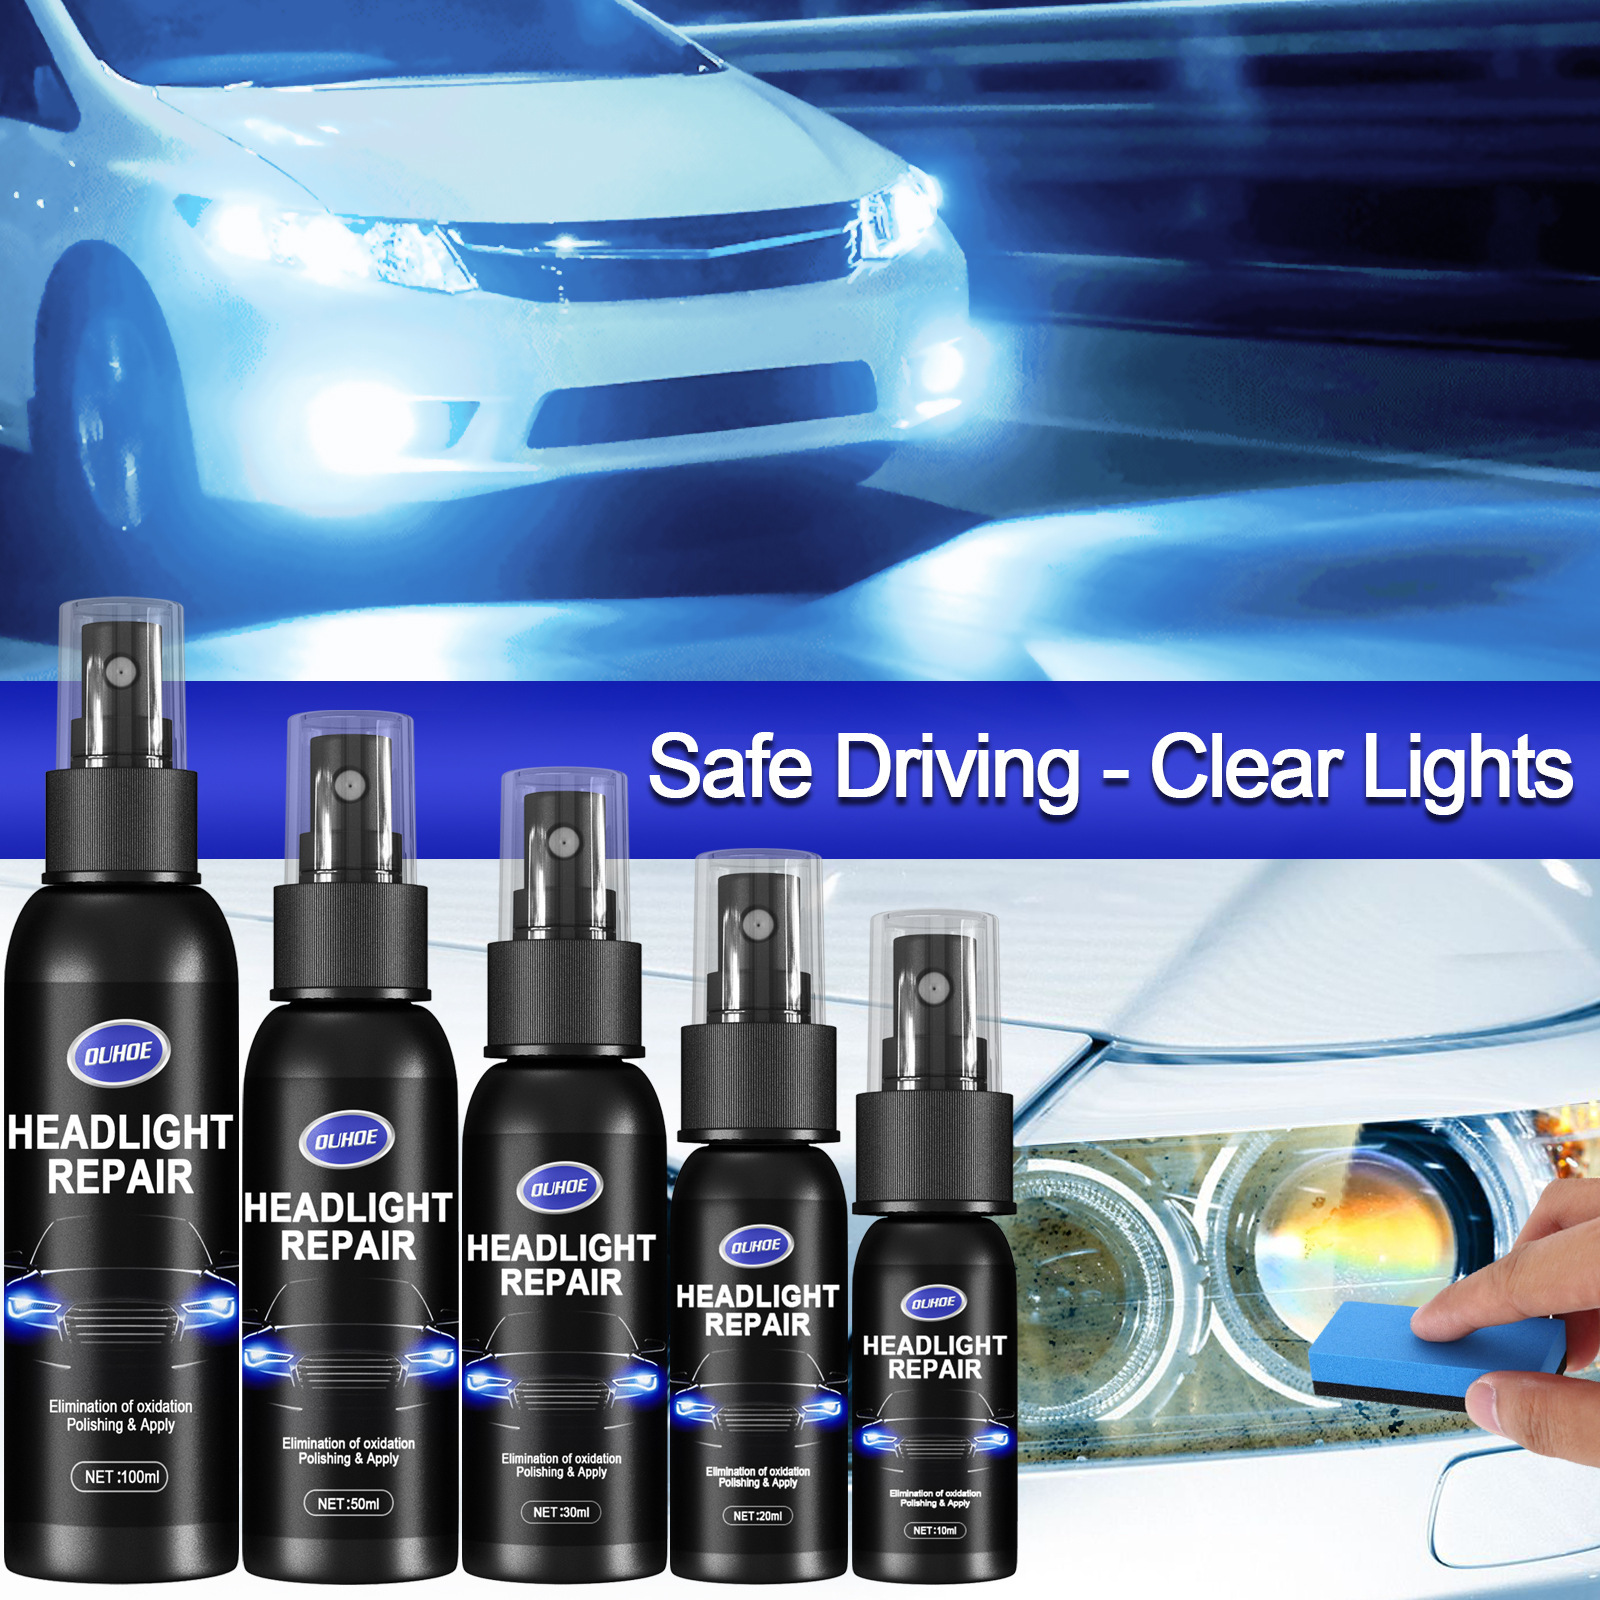 High Protection 3 In 1 Car Coating Spray 100ml Auto Nano Ceramic Coating  Polishing Spraying Wax Car Paint Scratch Repair Remover - AliExpress